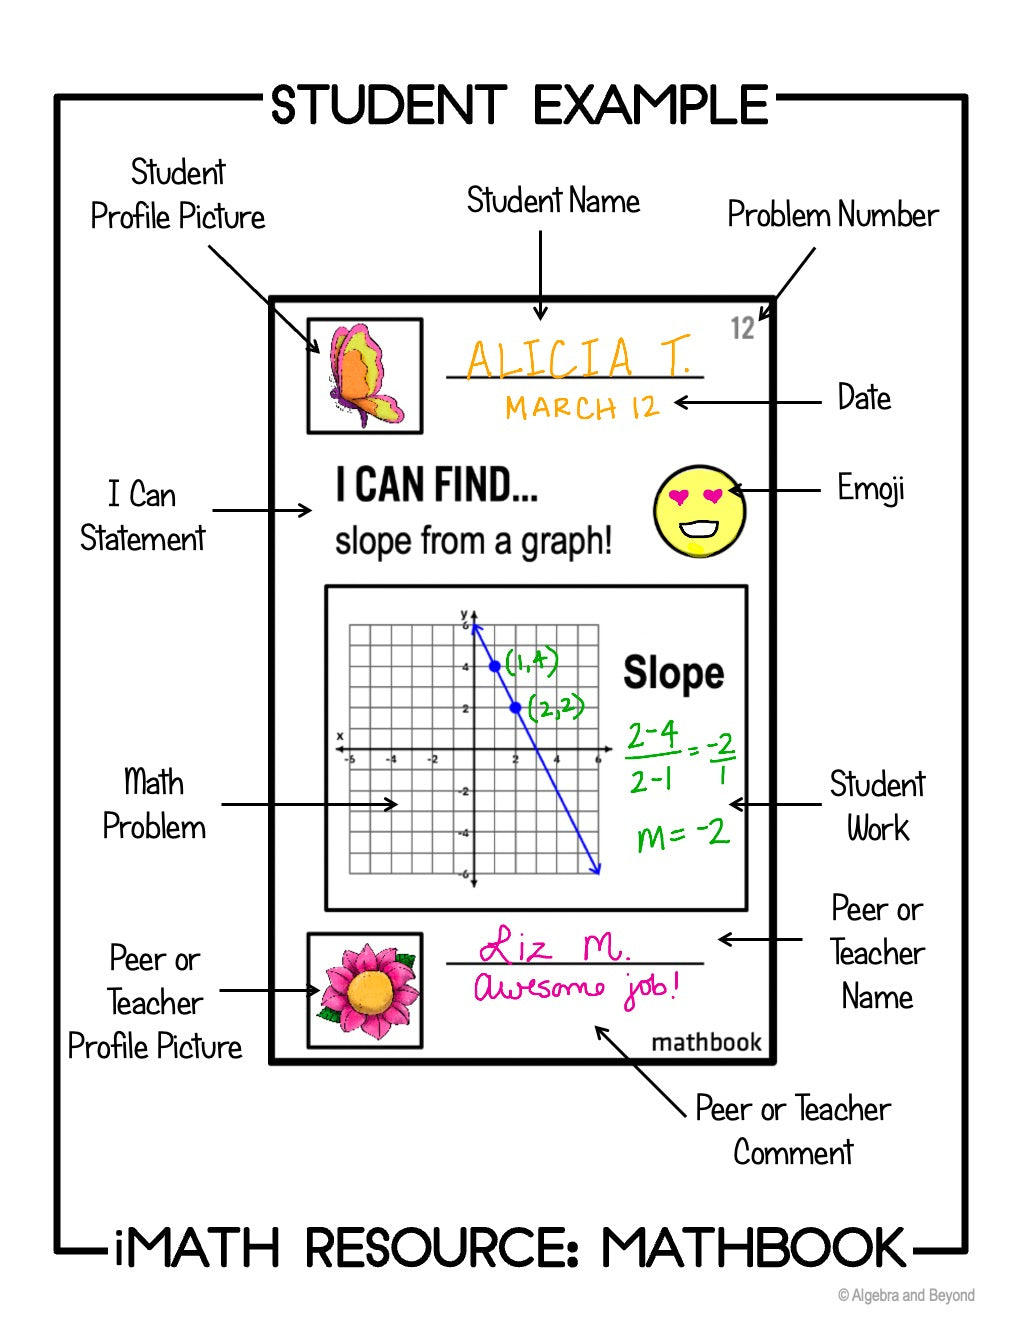 Find Slope from a Graph | Review Activity | Mathbook